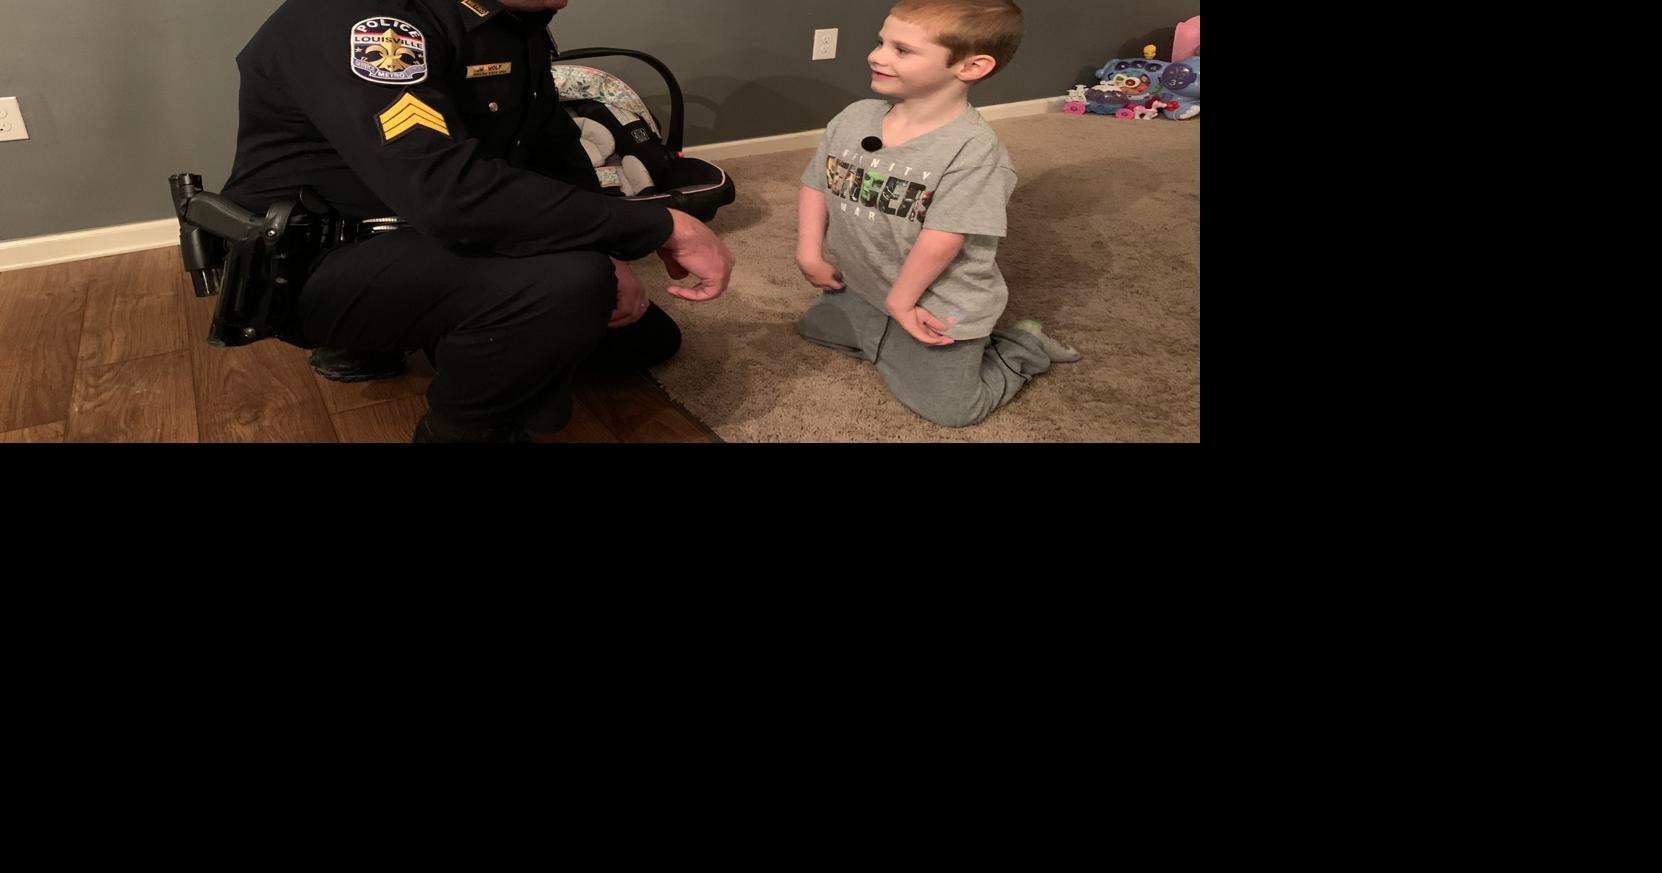 Patrolling LMPD officer makes miraculous find, surprises 6-year-old ...